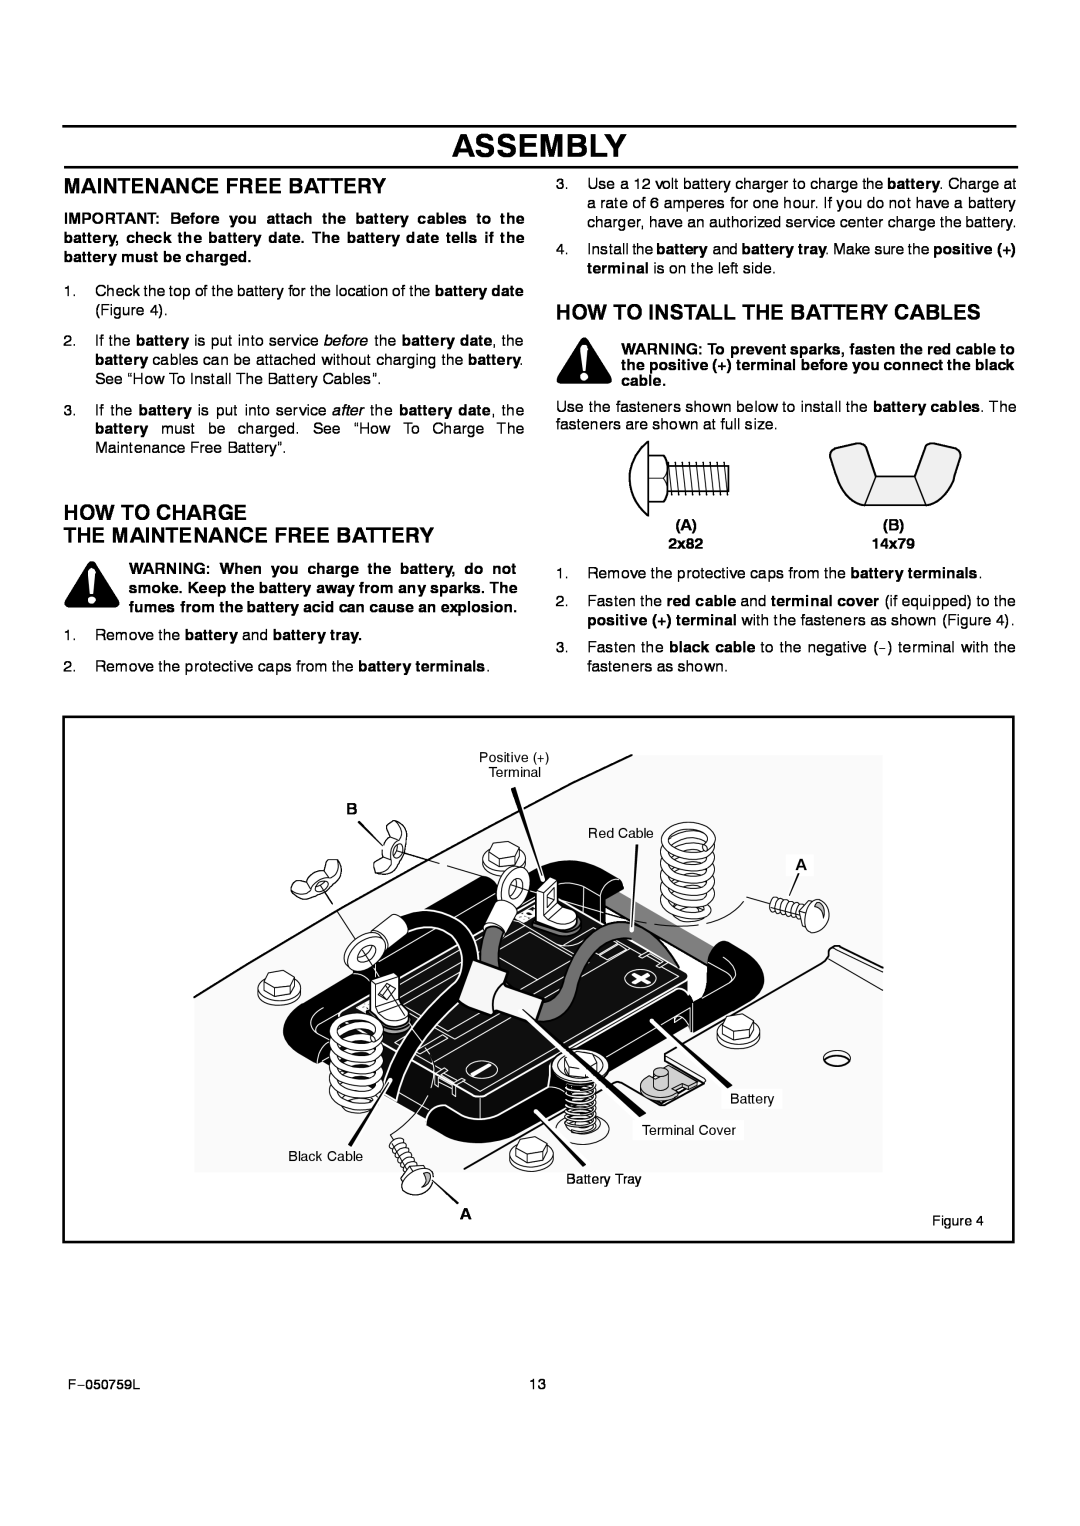 Rover 405012x108A owner manual How To Charge The Maintenance Free Battery, How To Install The Battery Cables, Assembly 